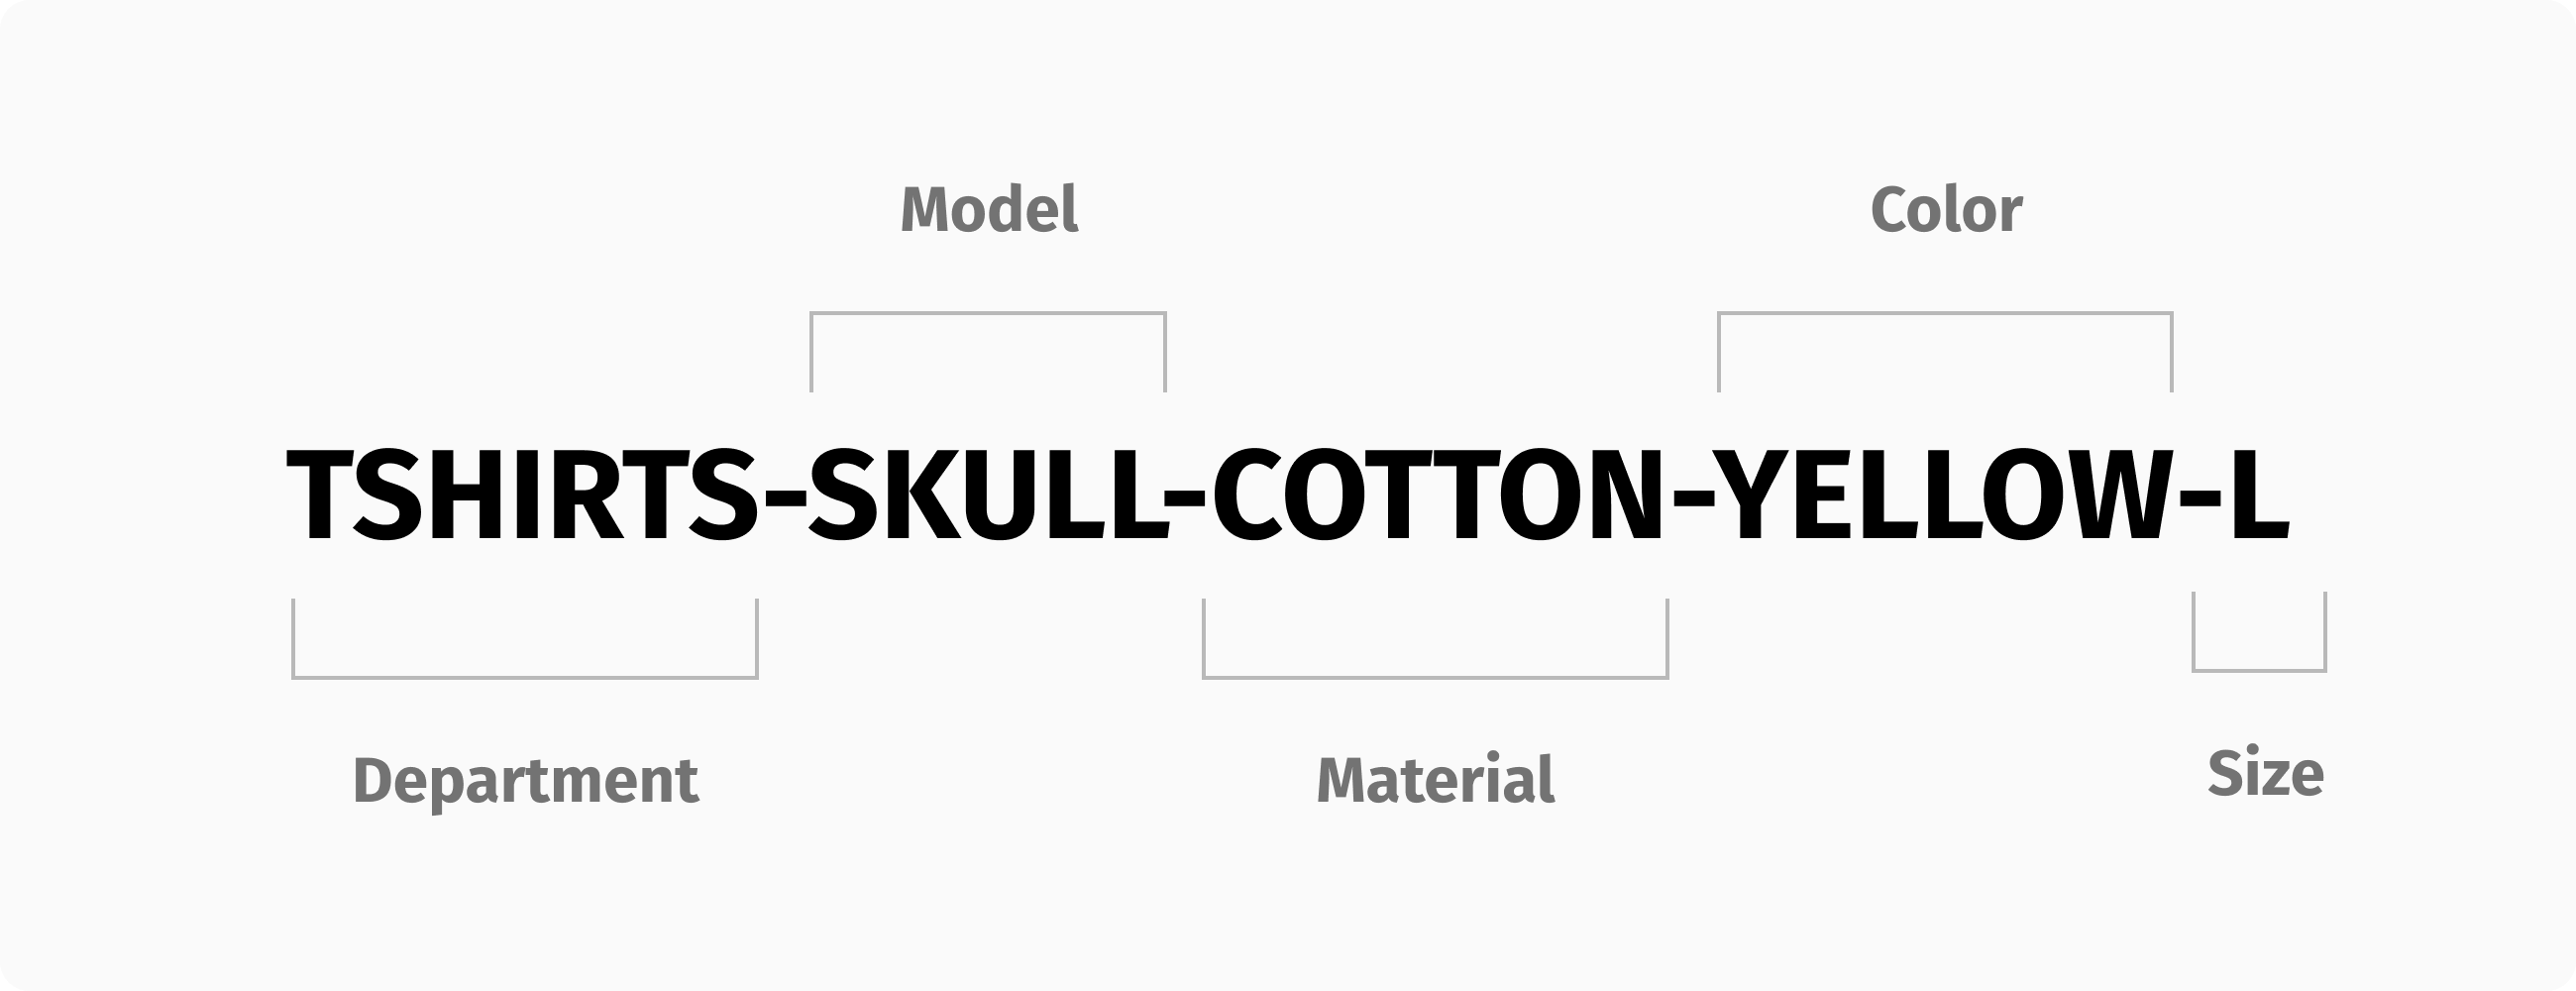 An example of a fashion brand's SKU code.